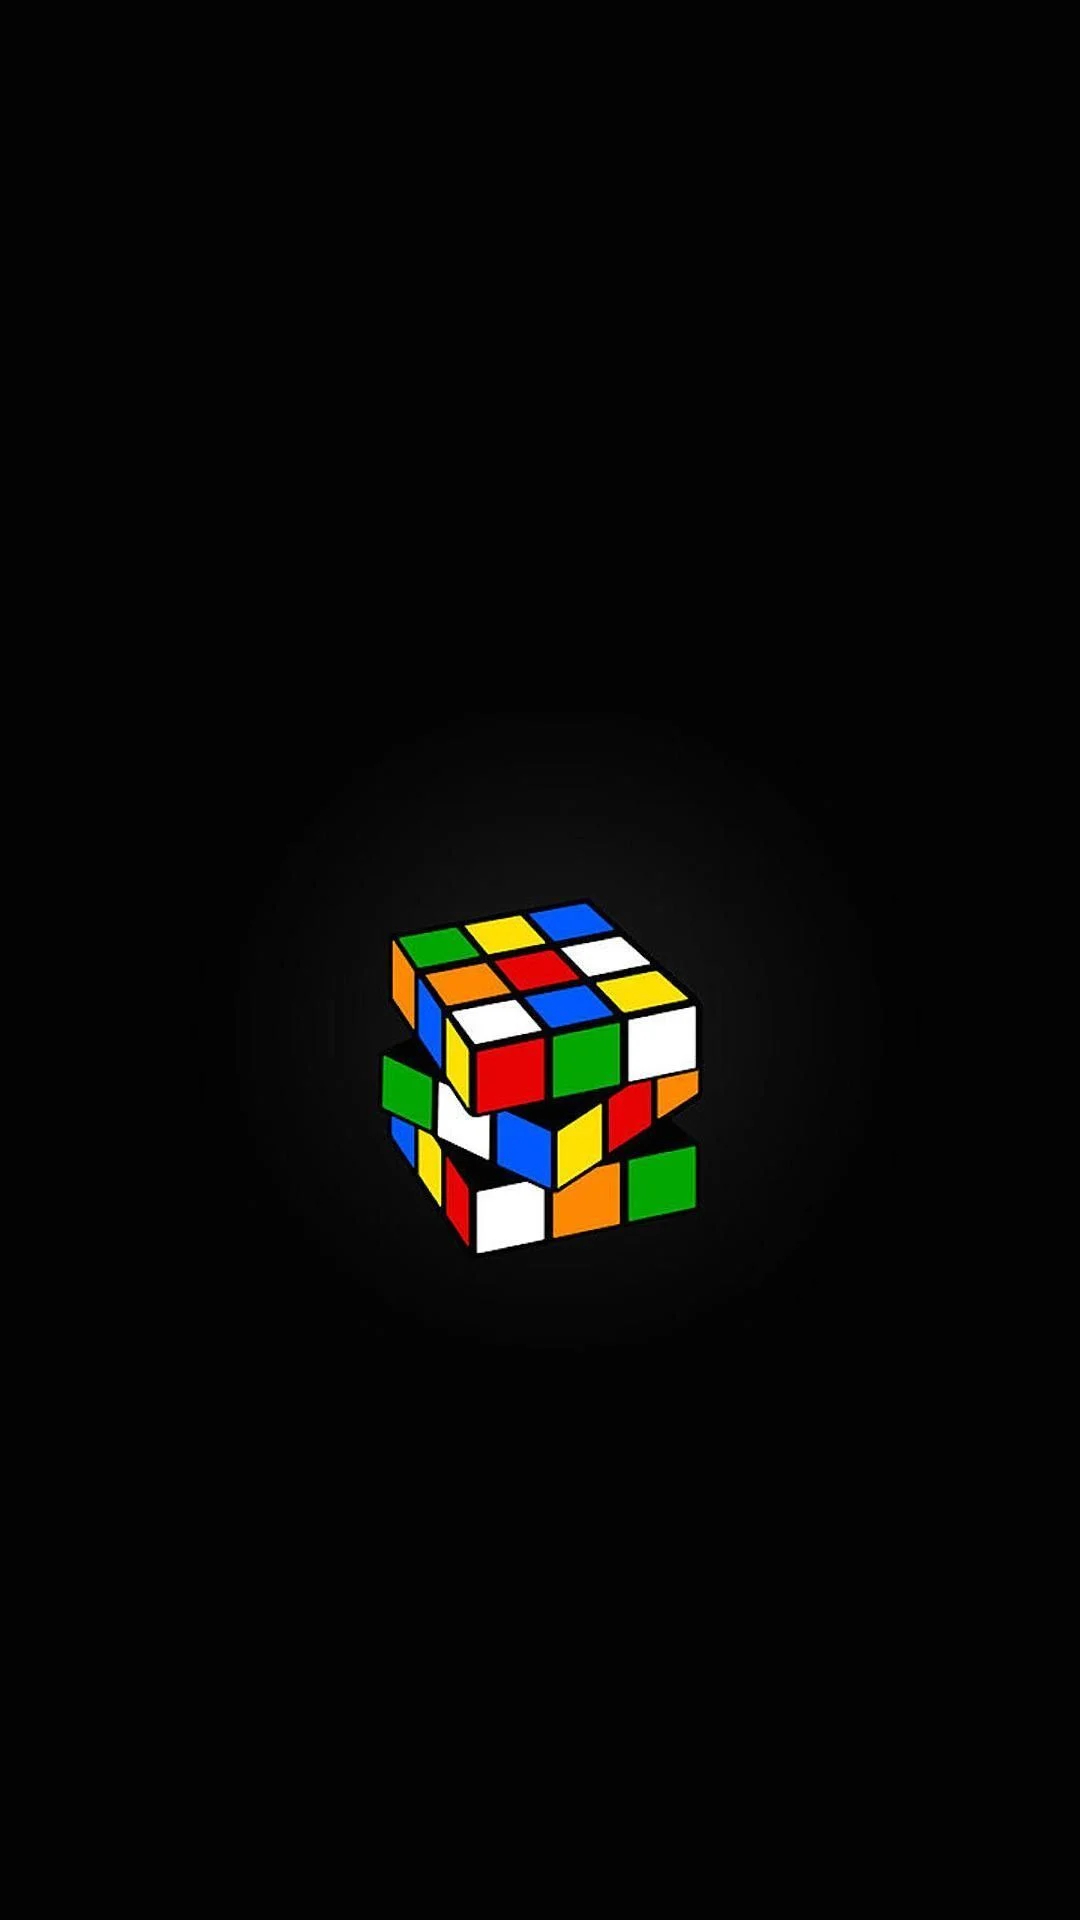 1080x1920 Rubik's Cube Wallpapers Top Free Rubik's Cube Backgrounds